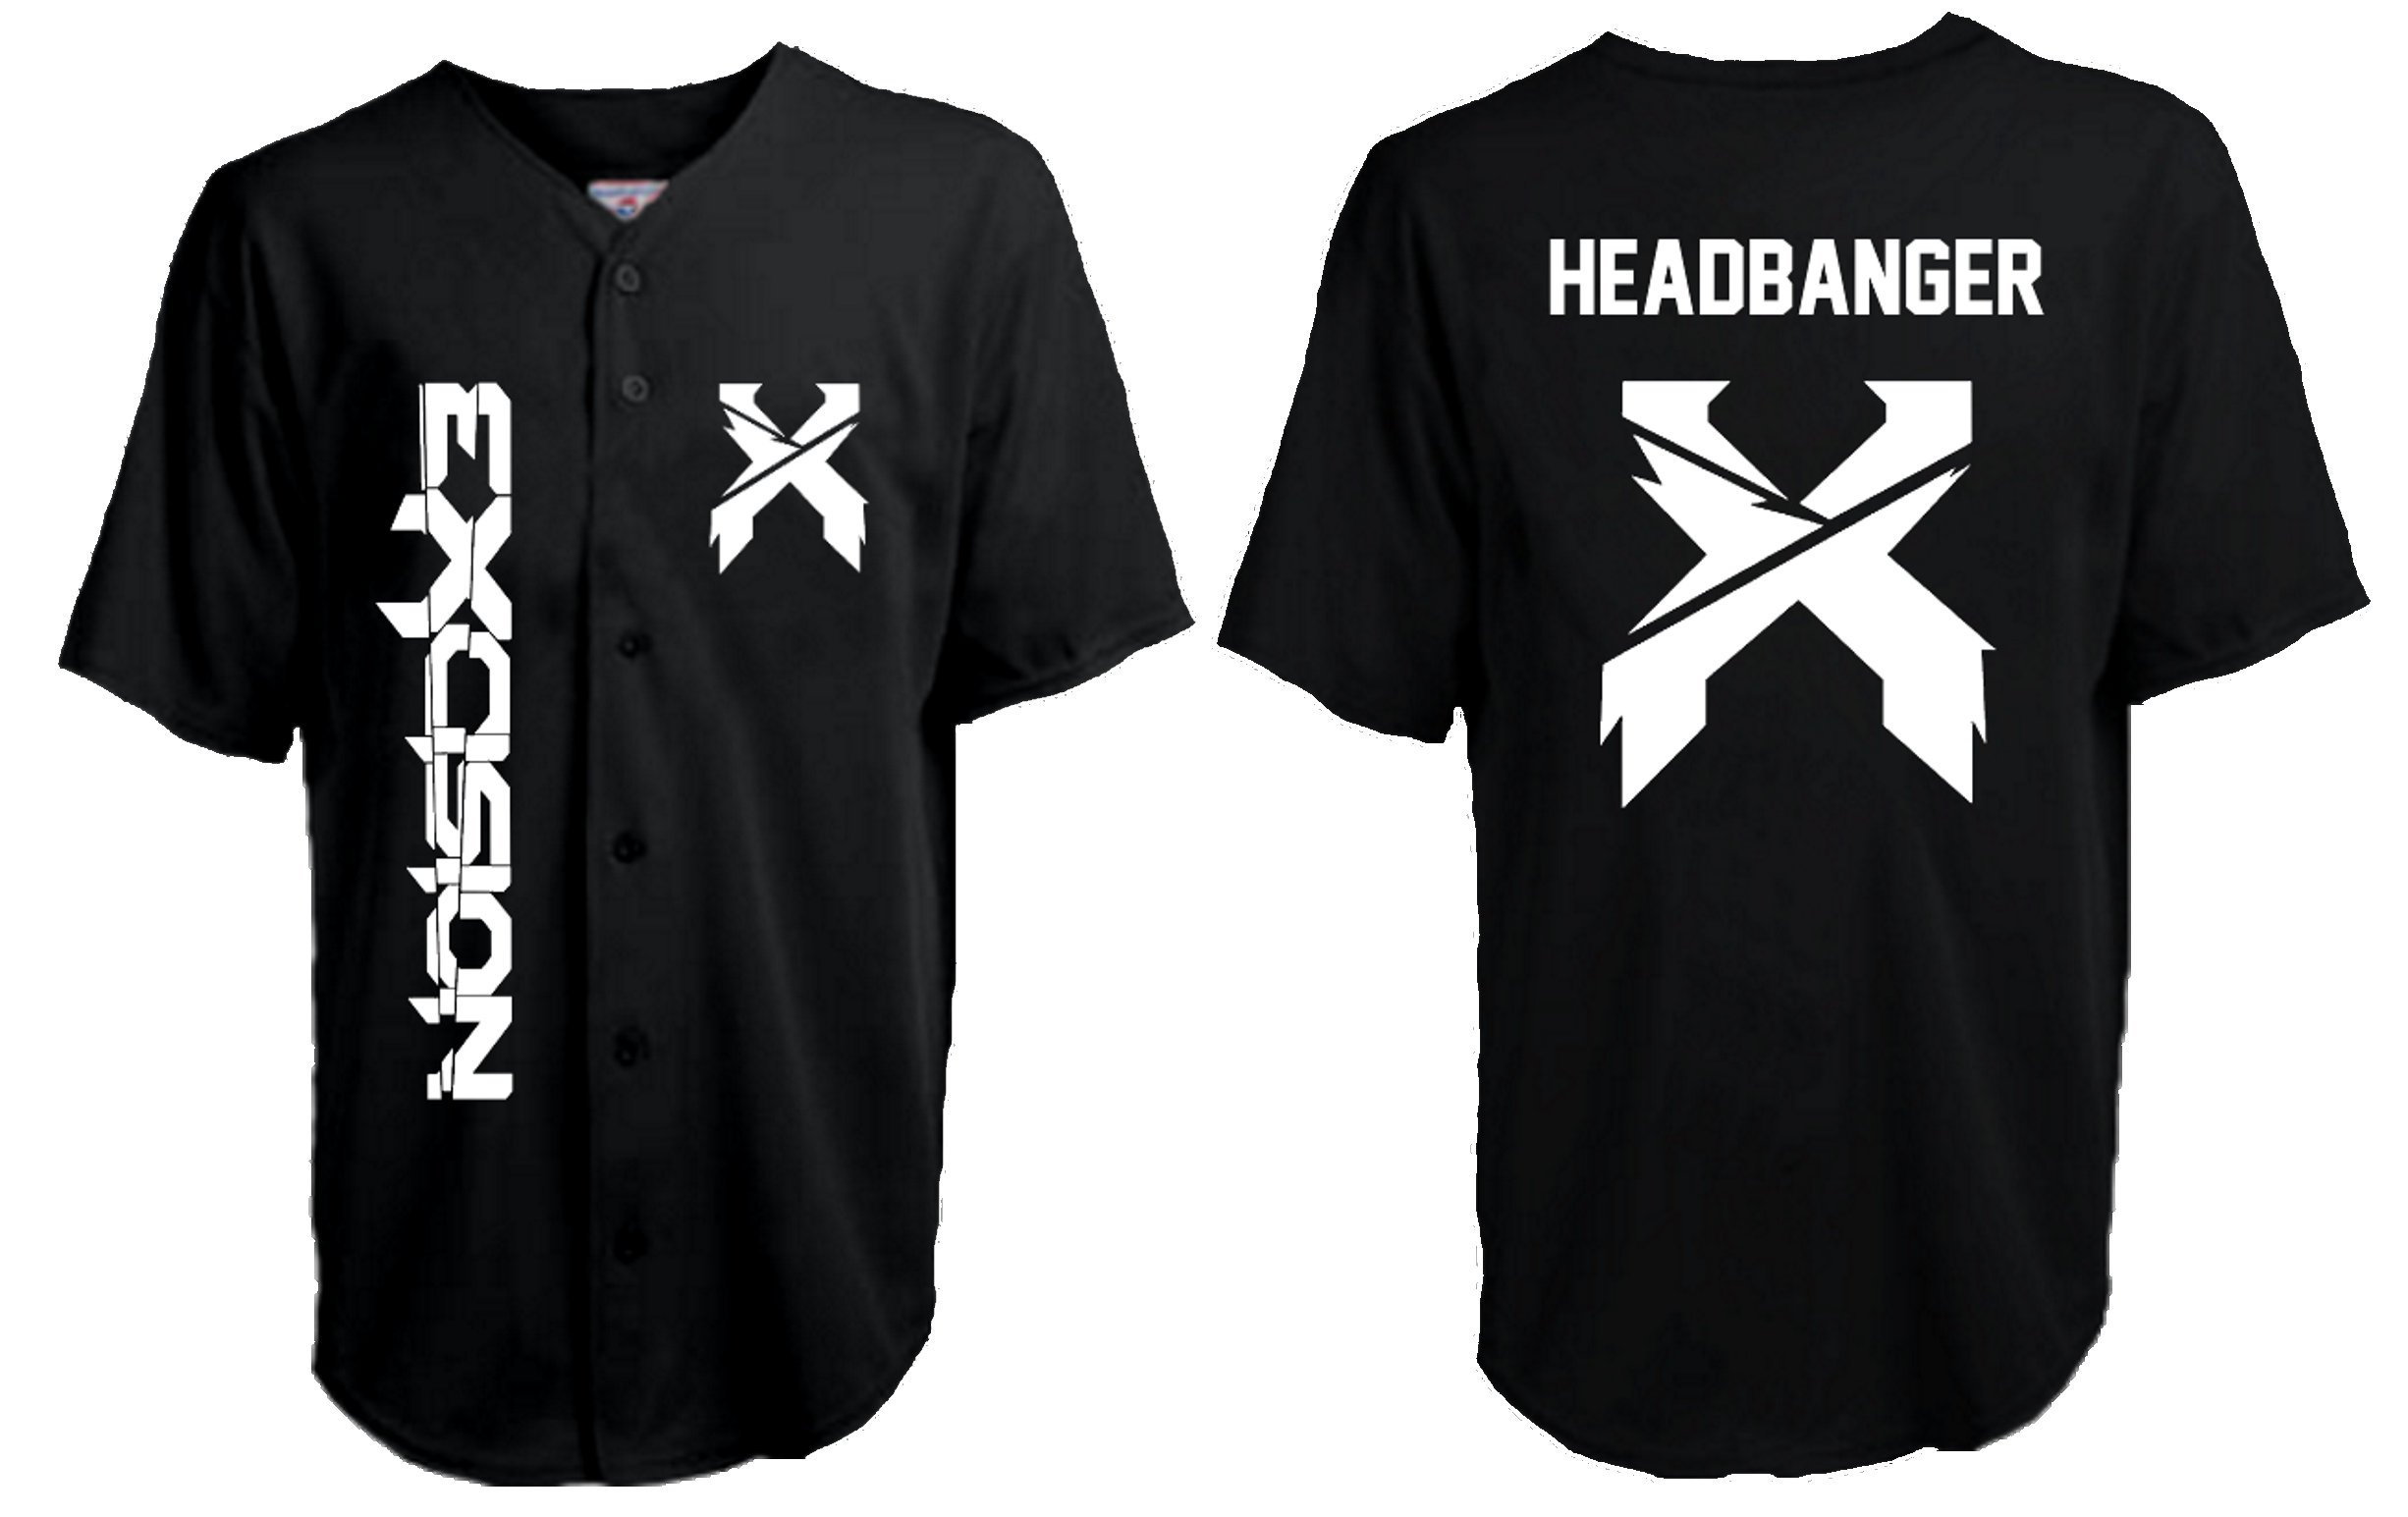 TheDropLine on X: Come get your Excision X Headbanger Blackout Jersey at   #clothing #shirt #black #white #shortsleeve #jersey  #excision #x #edm #LostLands  / X